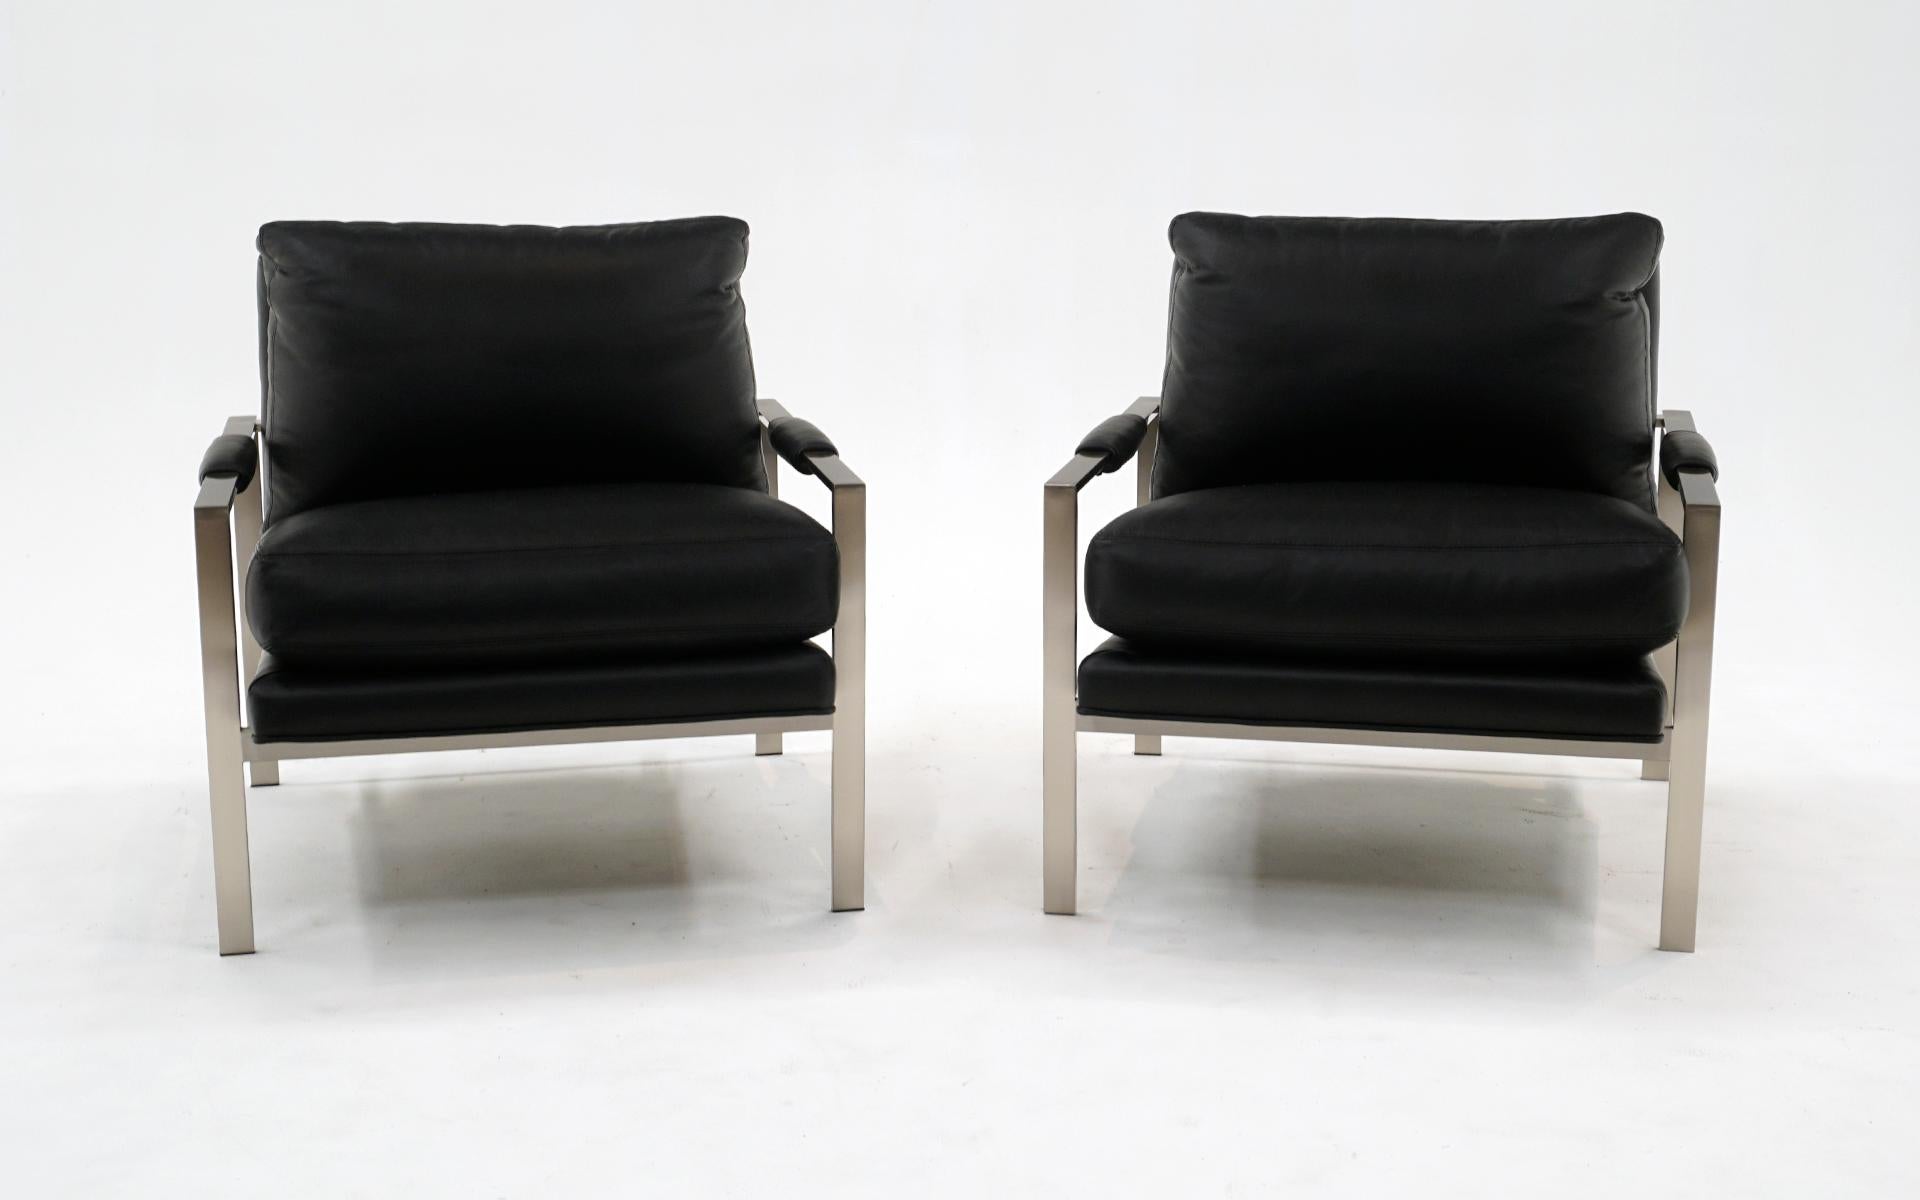 Black leather and brushed steel lounge chairs with arms designed by Milo Baughman and made by Thayer Coggin. These are newer production and appear to have had very little use. No tears, scuffs, holes or repairs to the leather. Possibly some light